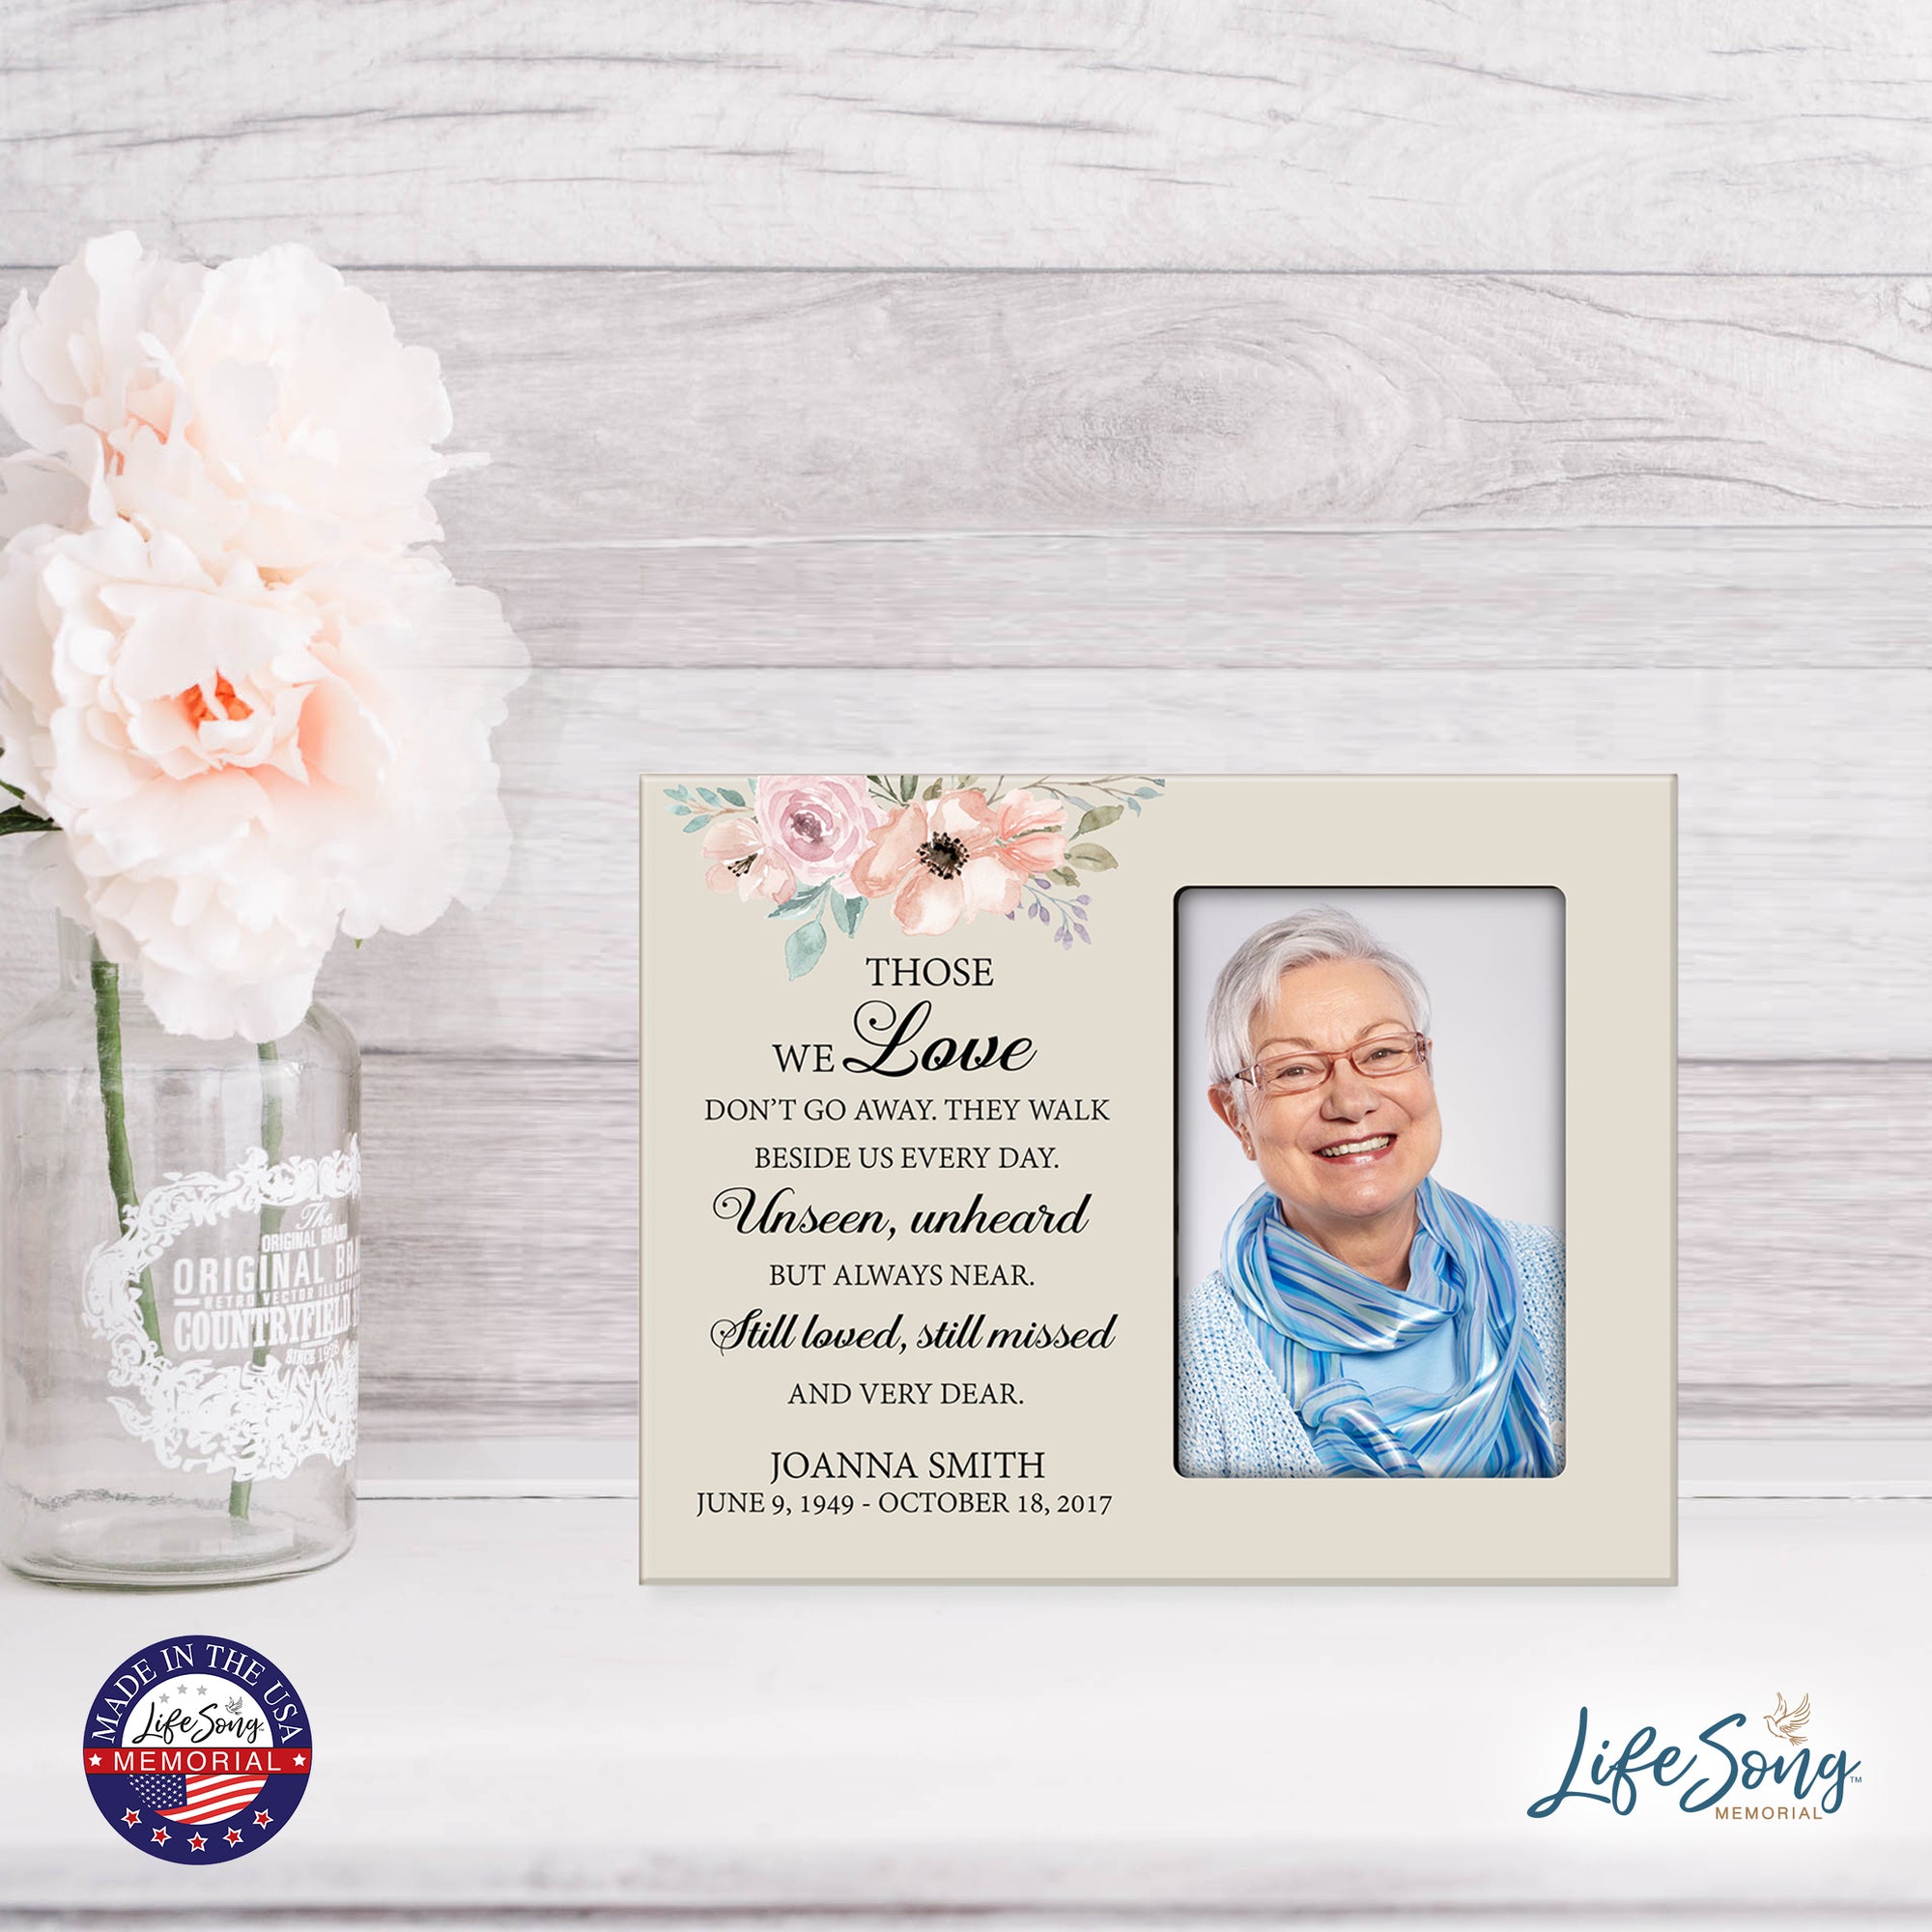 Personalized Horizontal 8x10 Wooden Memorial Picture Frame Holds 4x6 Photo - Those We Love Don’t Go (Thought)